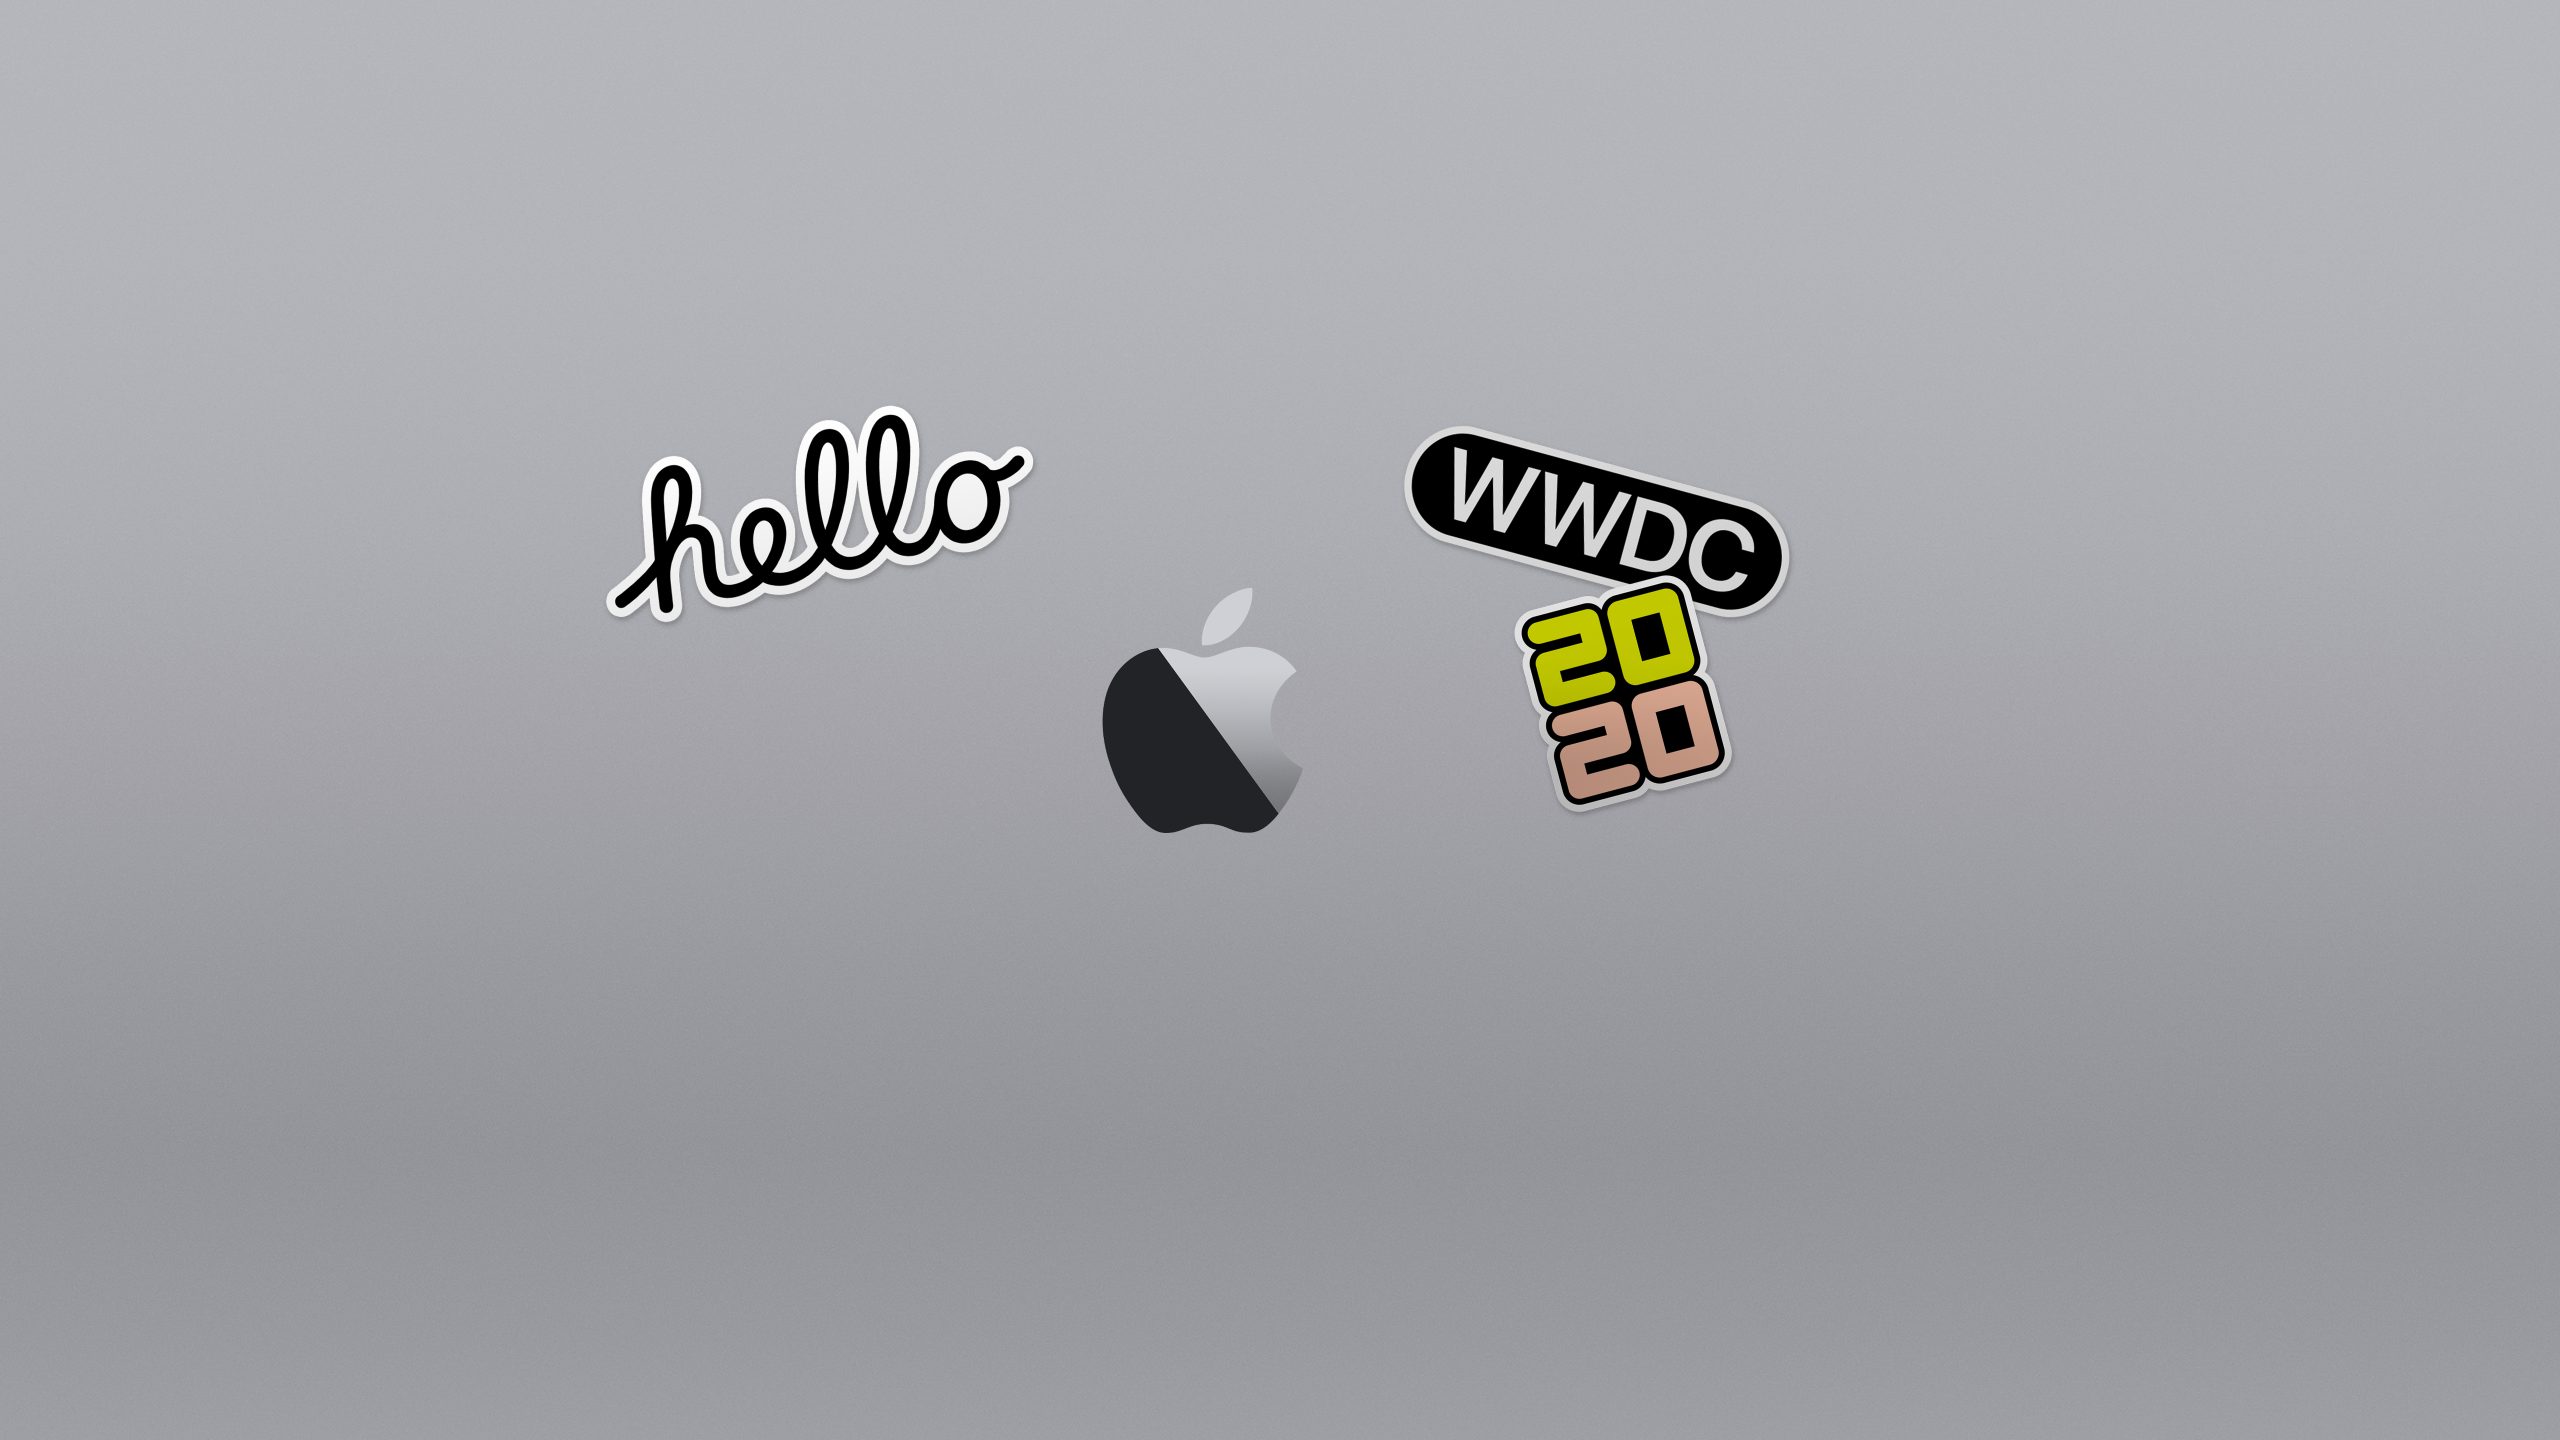 Download WWDC 2020 Wallpapers For iPhone, iPad & Mac